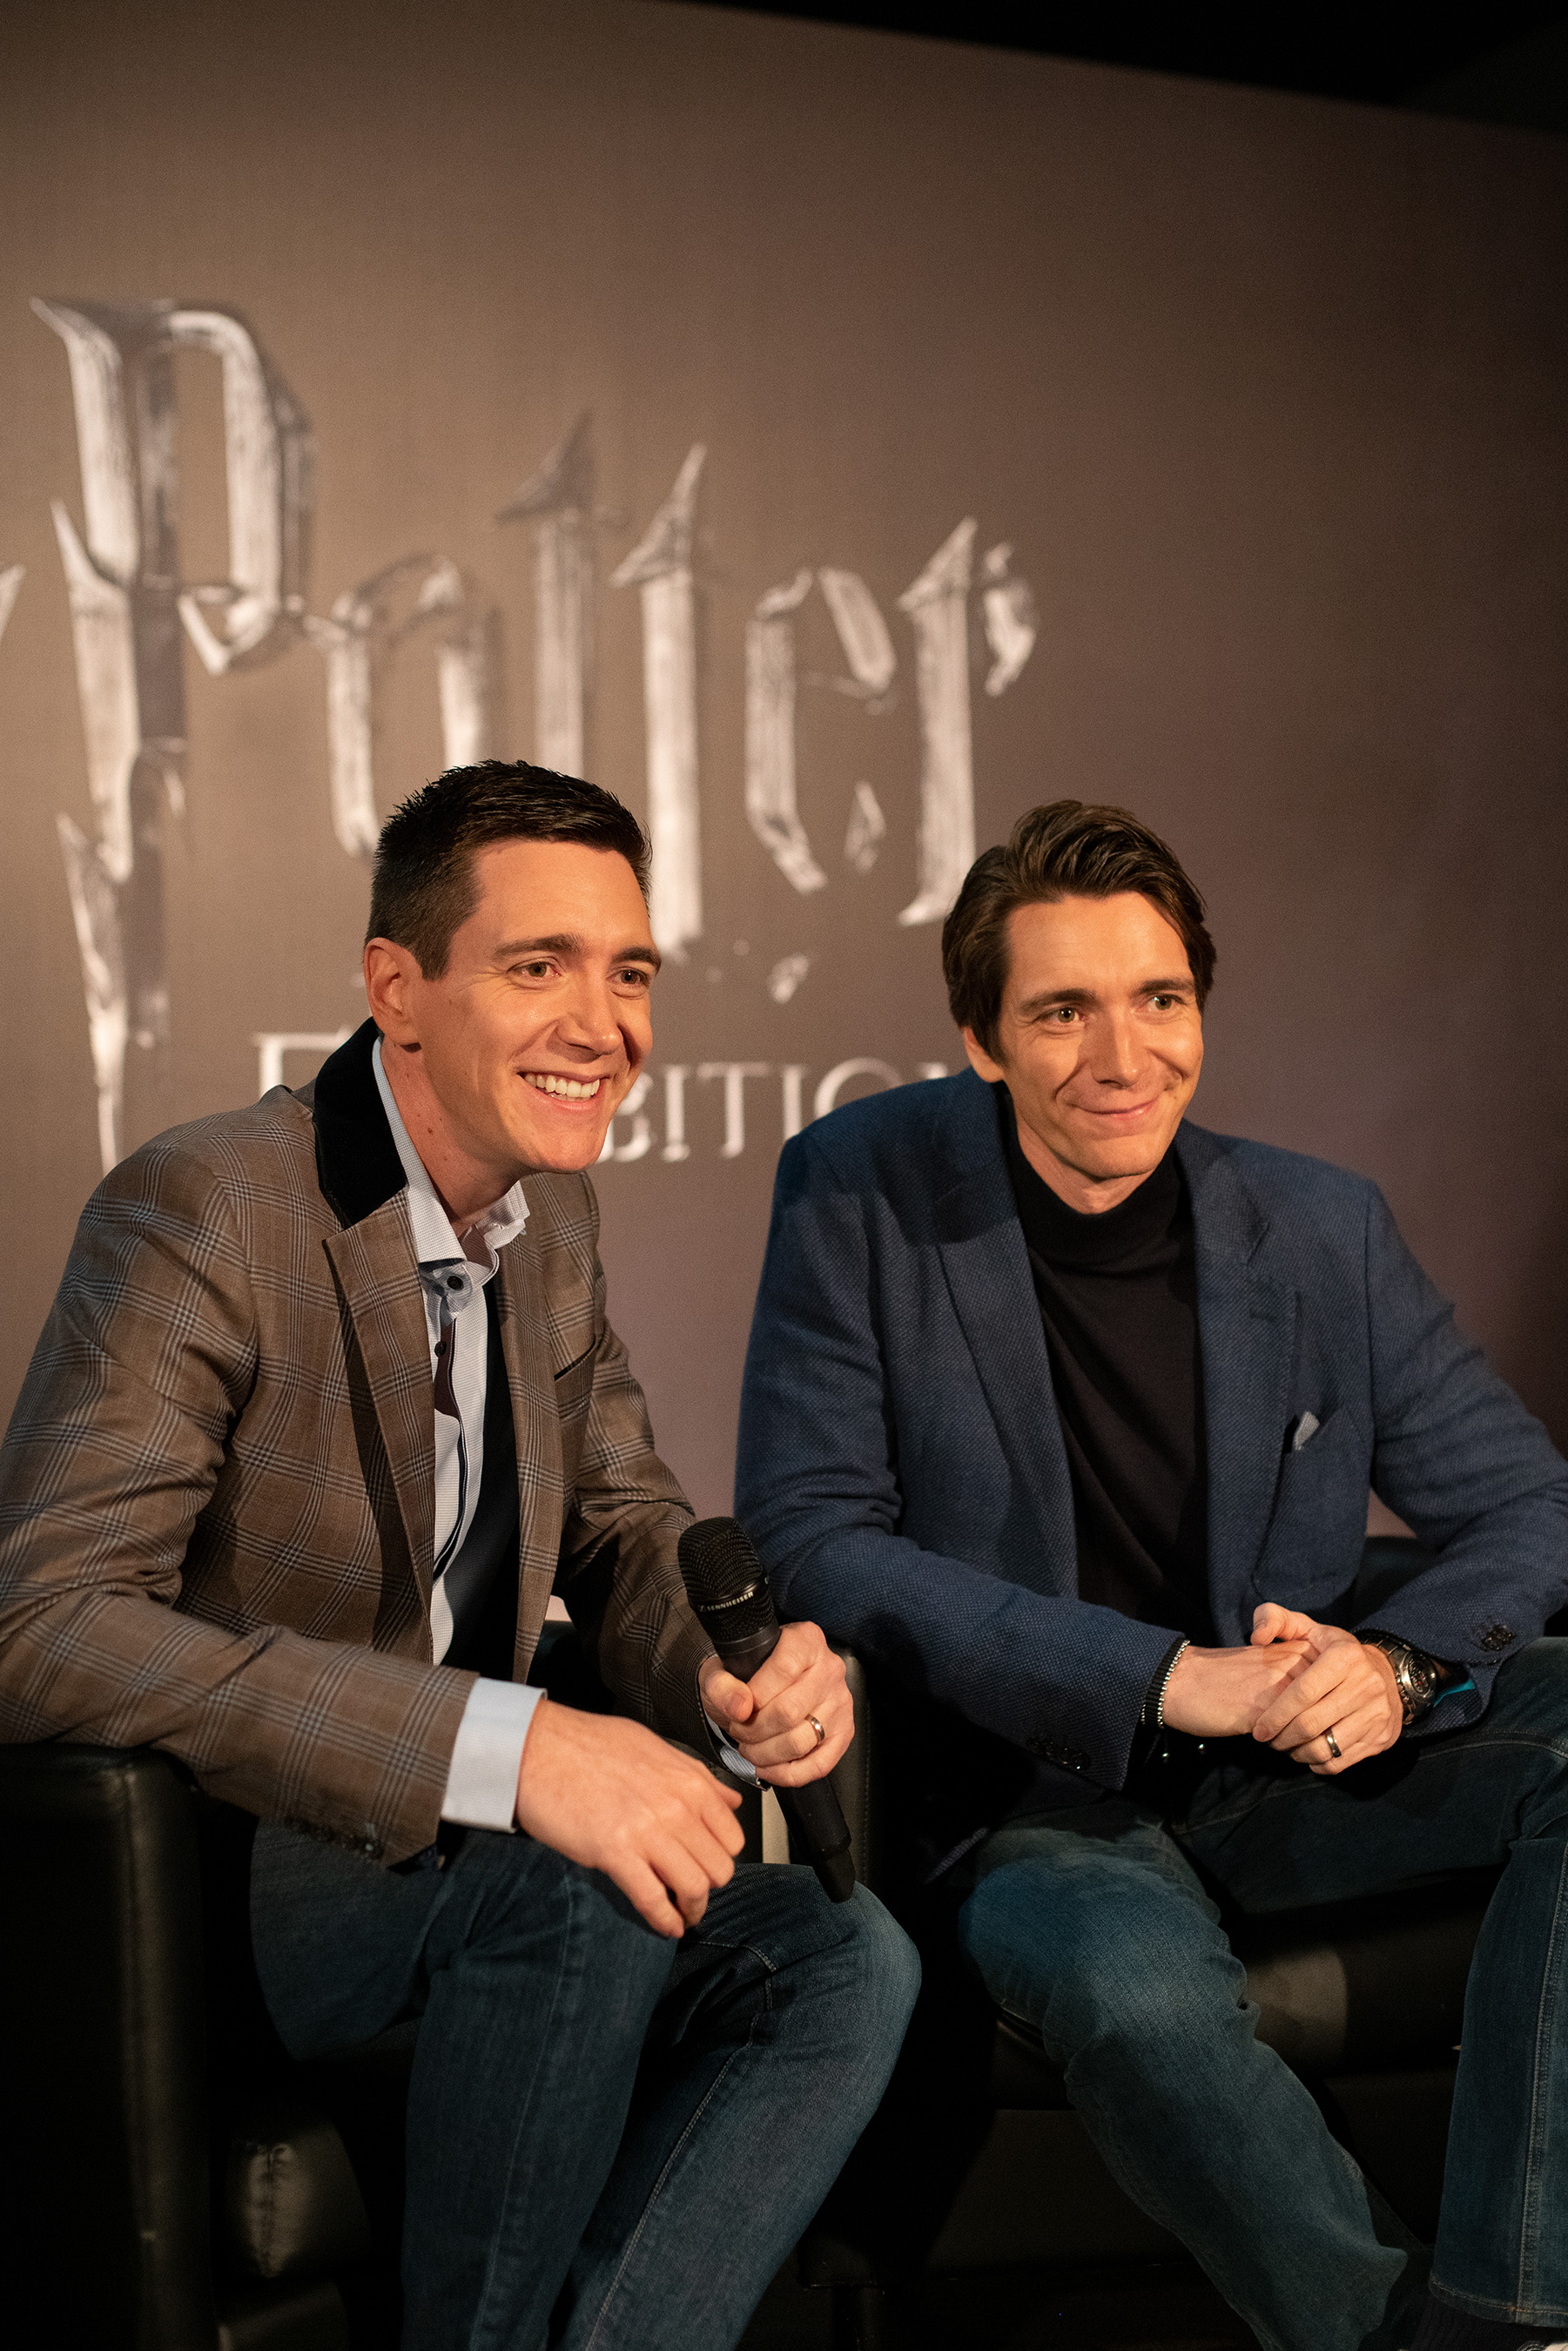 Film actors Oliver Phelps and James Phelps at Harry Potter™: The Exhibition at the Pavilion of Portugal in Lisbon, Portugal